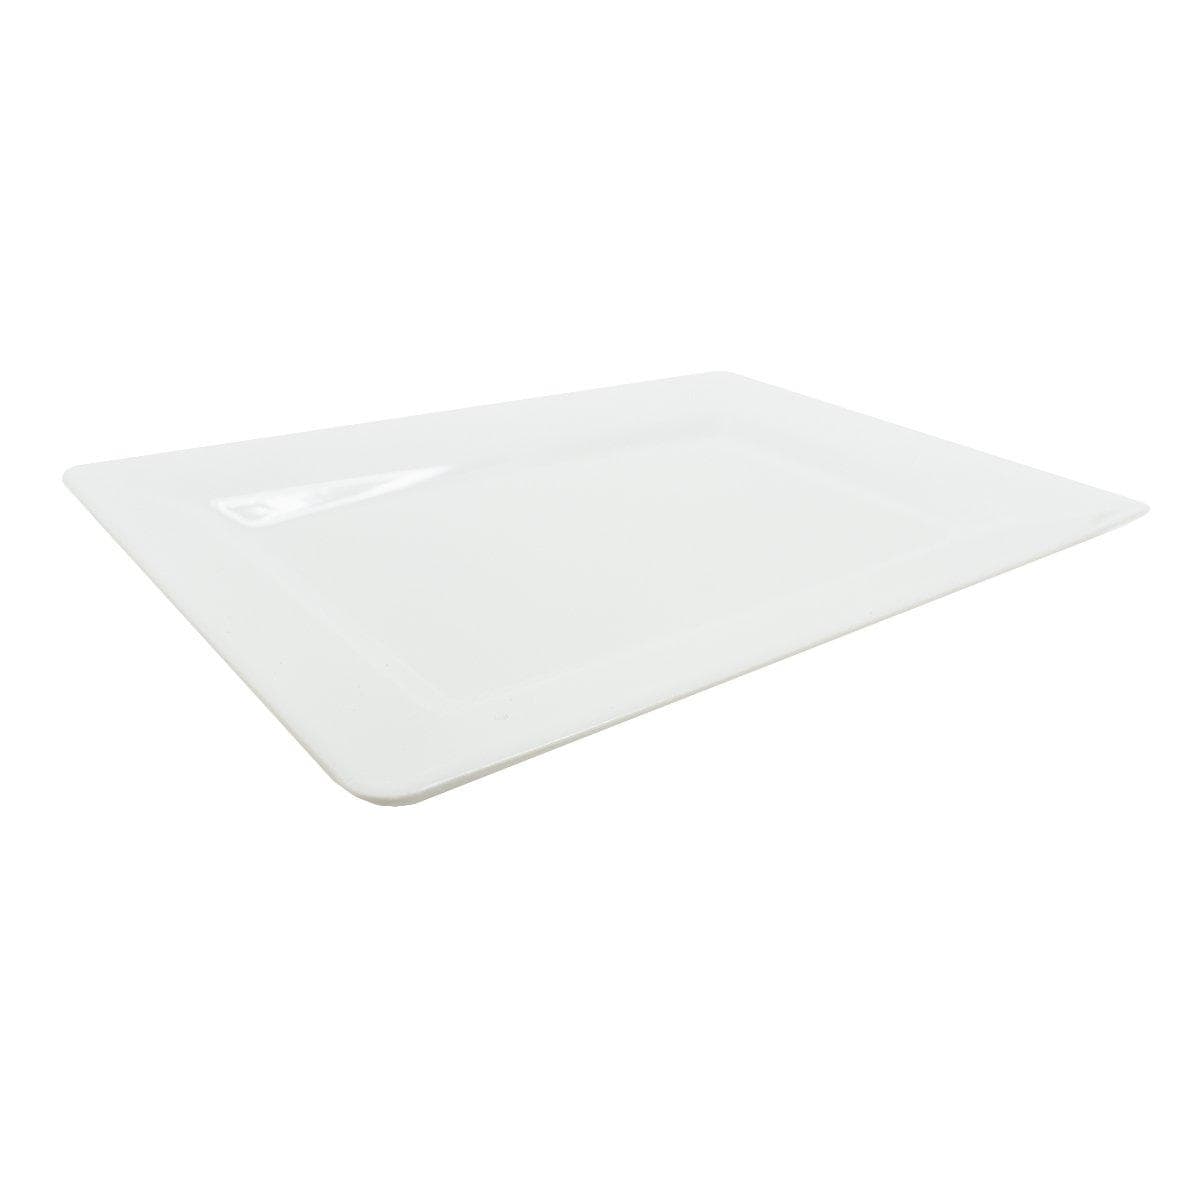 Buy Plasticware Rectangle Plate 7.5 In. 10/pkg - White sold at Party Expert